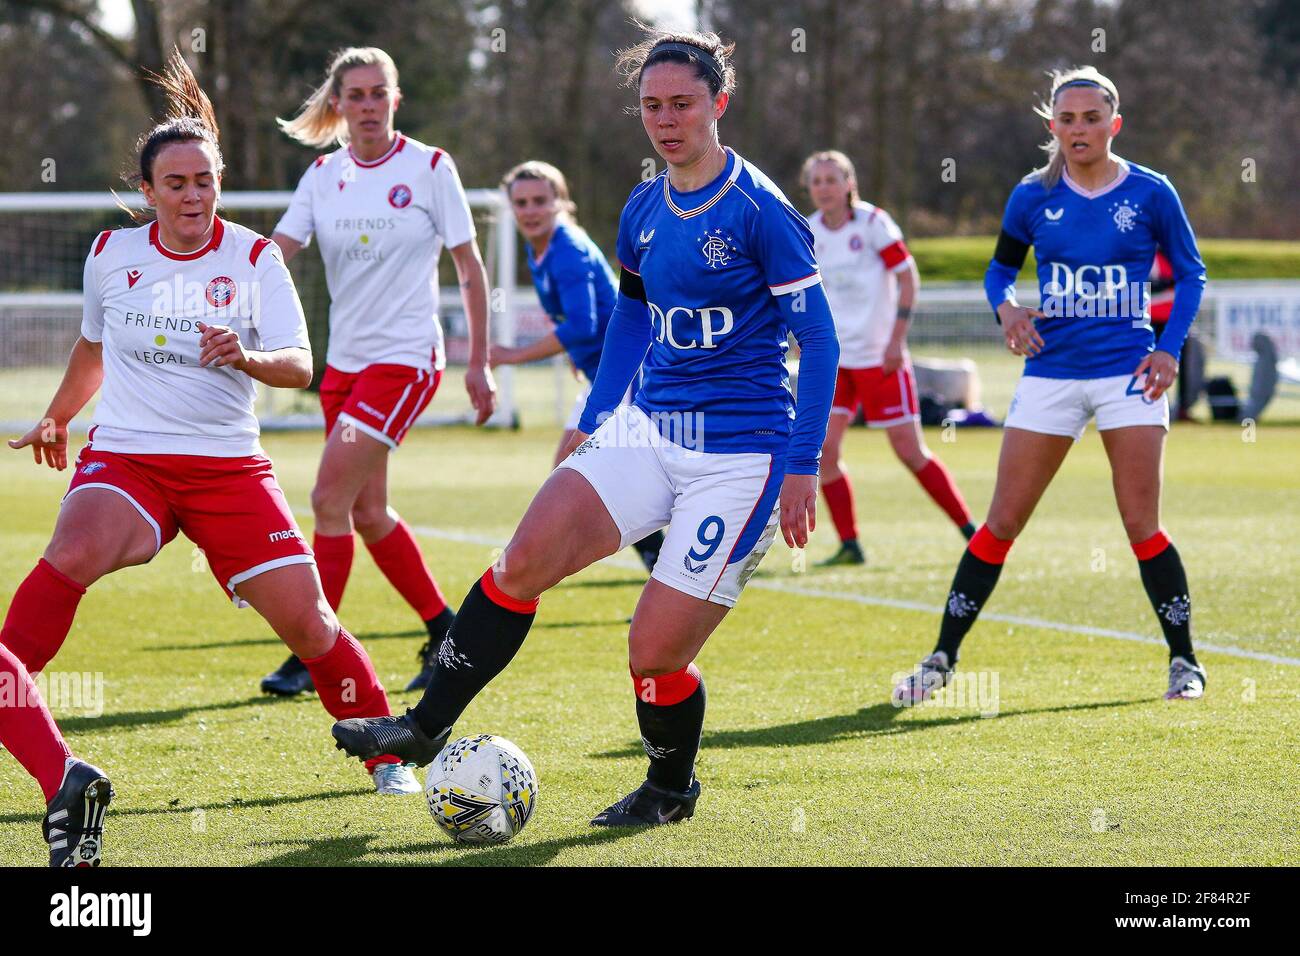 Glasgow, UK. 11th Apr, 2021. Zoe Ness (#9) of Rangers Women FCduring the Scottish Building Society SWPL1 Fixture Rangers FC vs Spartans FC at Rangers Training Centre, Glasgow, 11/04/2021 | Images courtesy of www.collargeimages.co.uk Credit: Colin Poultney/Alamy Live News Stock Photo